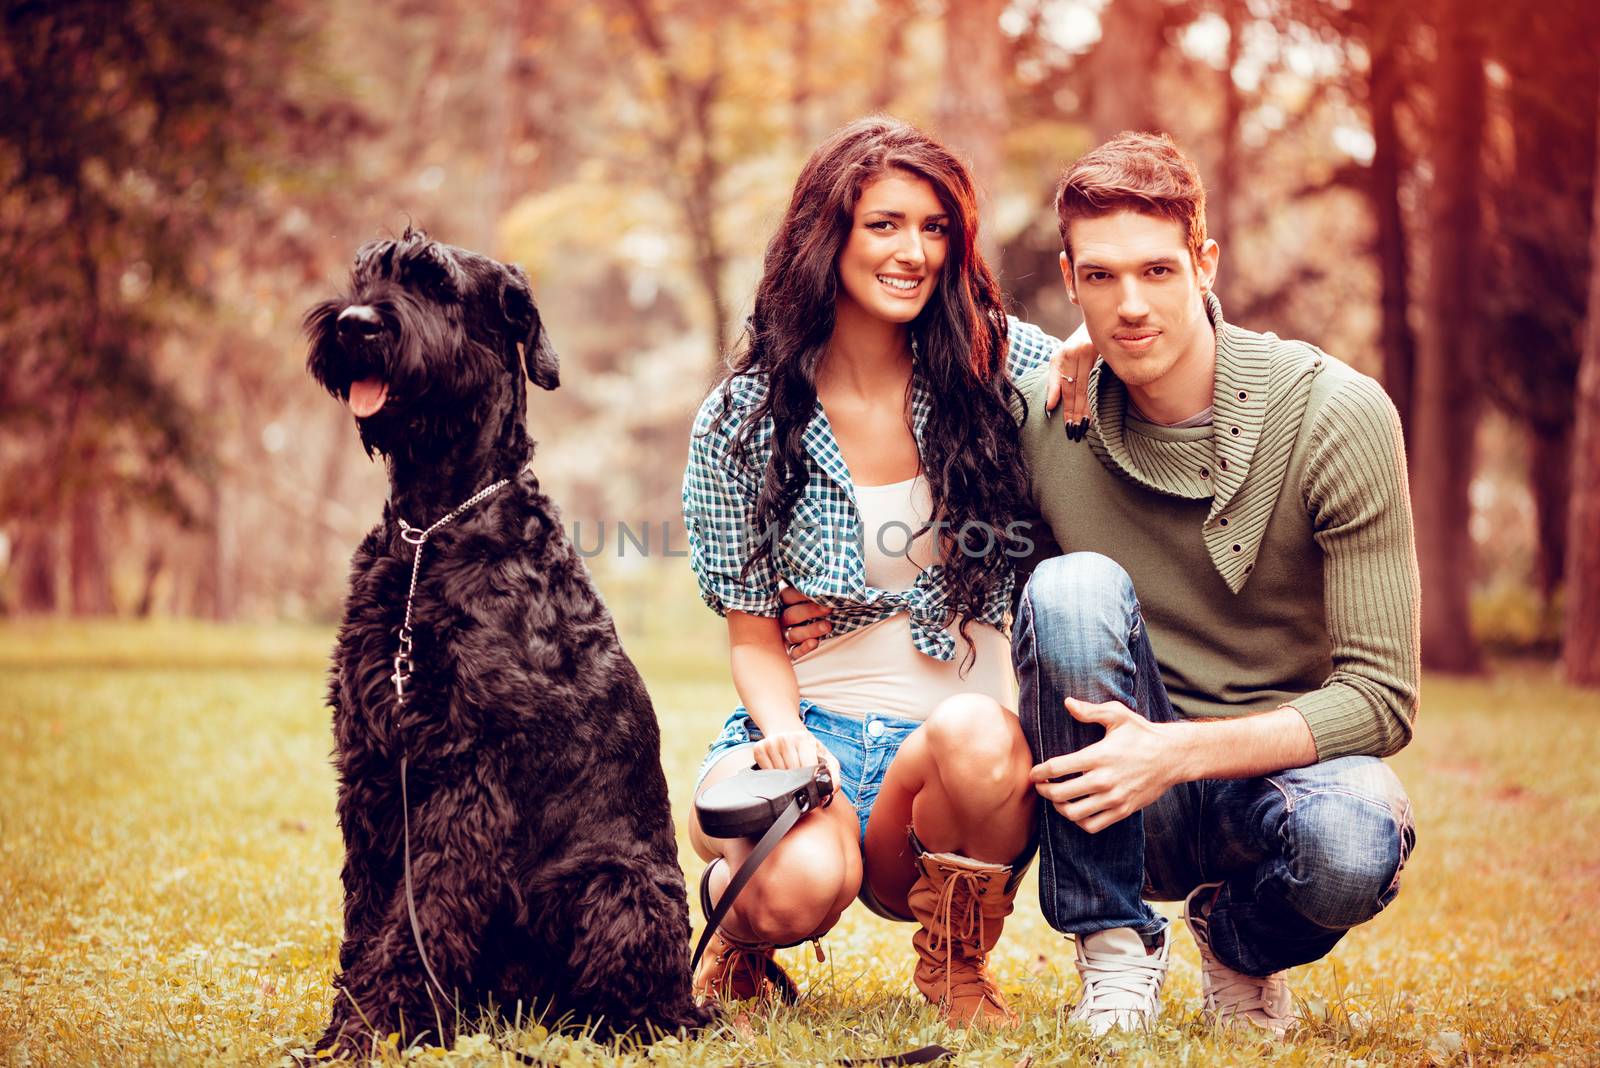 Beautiful lovely couple with a dog, a black giant schnauzer, enjoying in the park in autumn colors. Looking at camera.